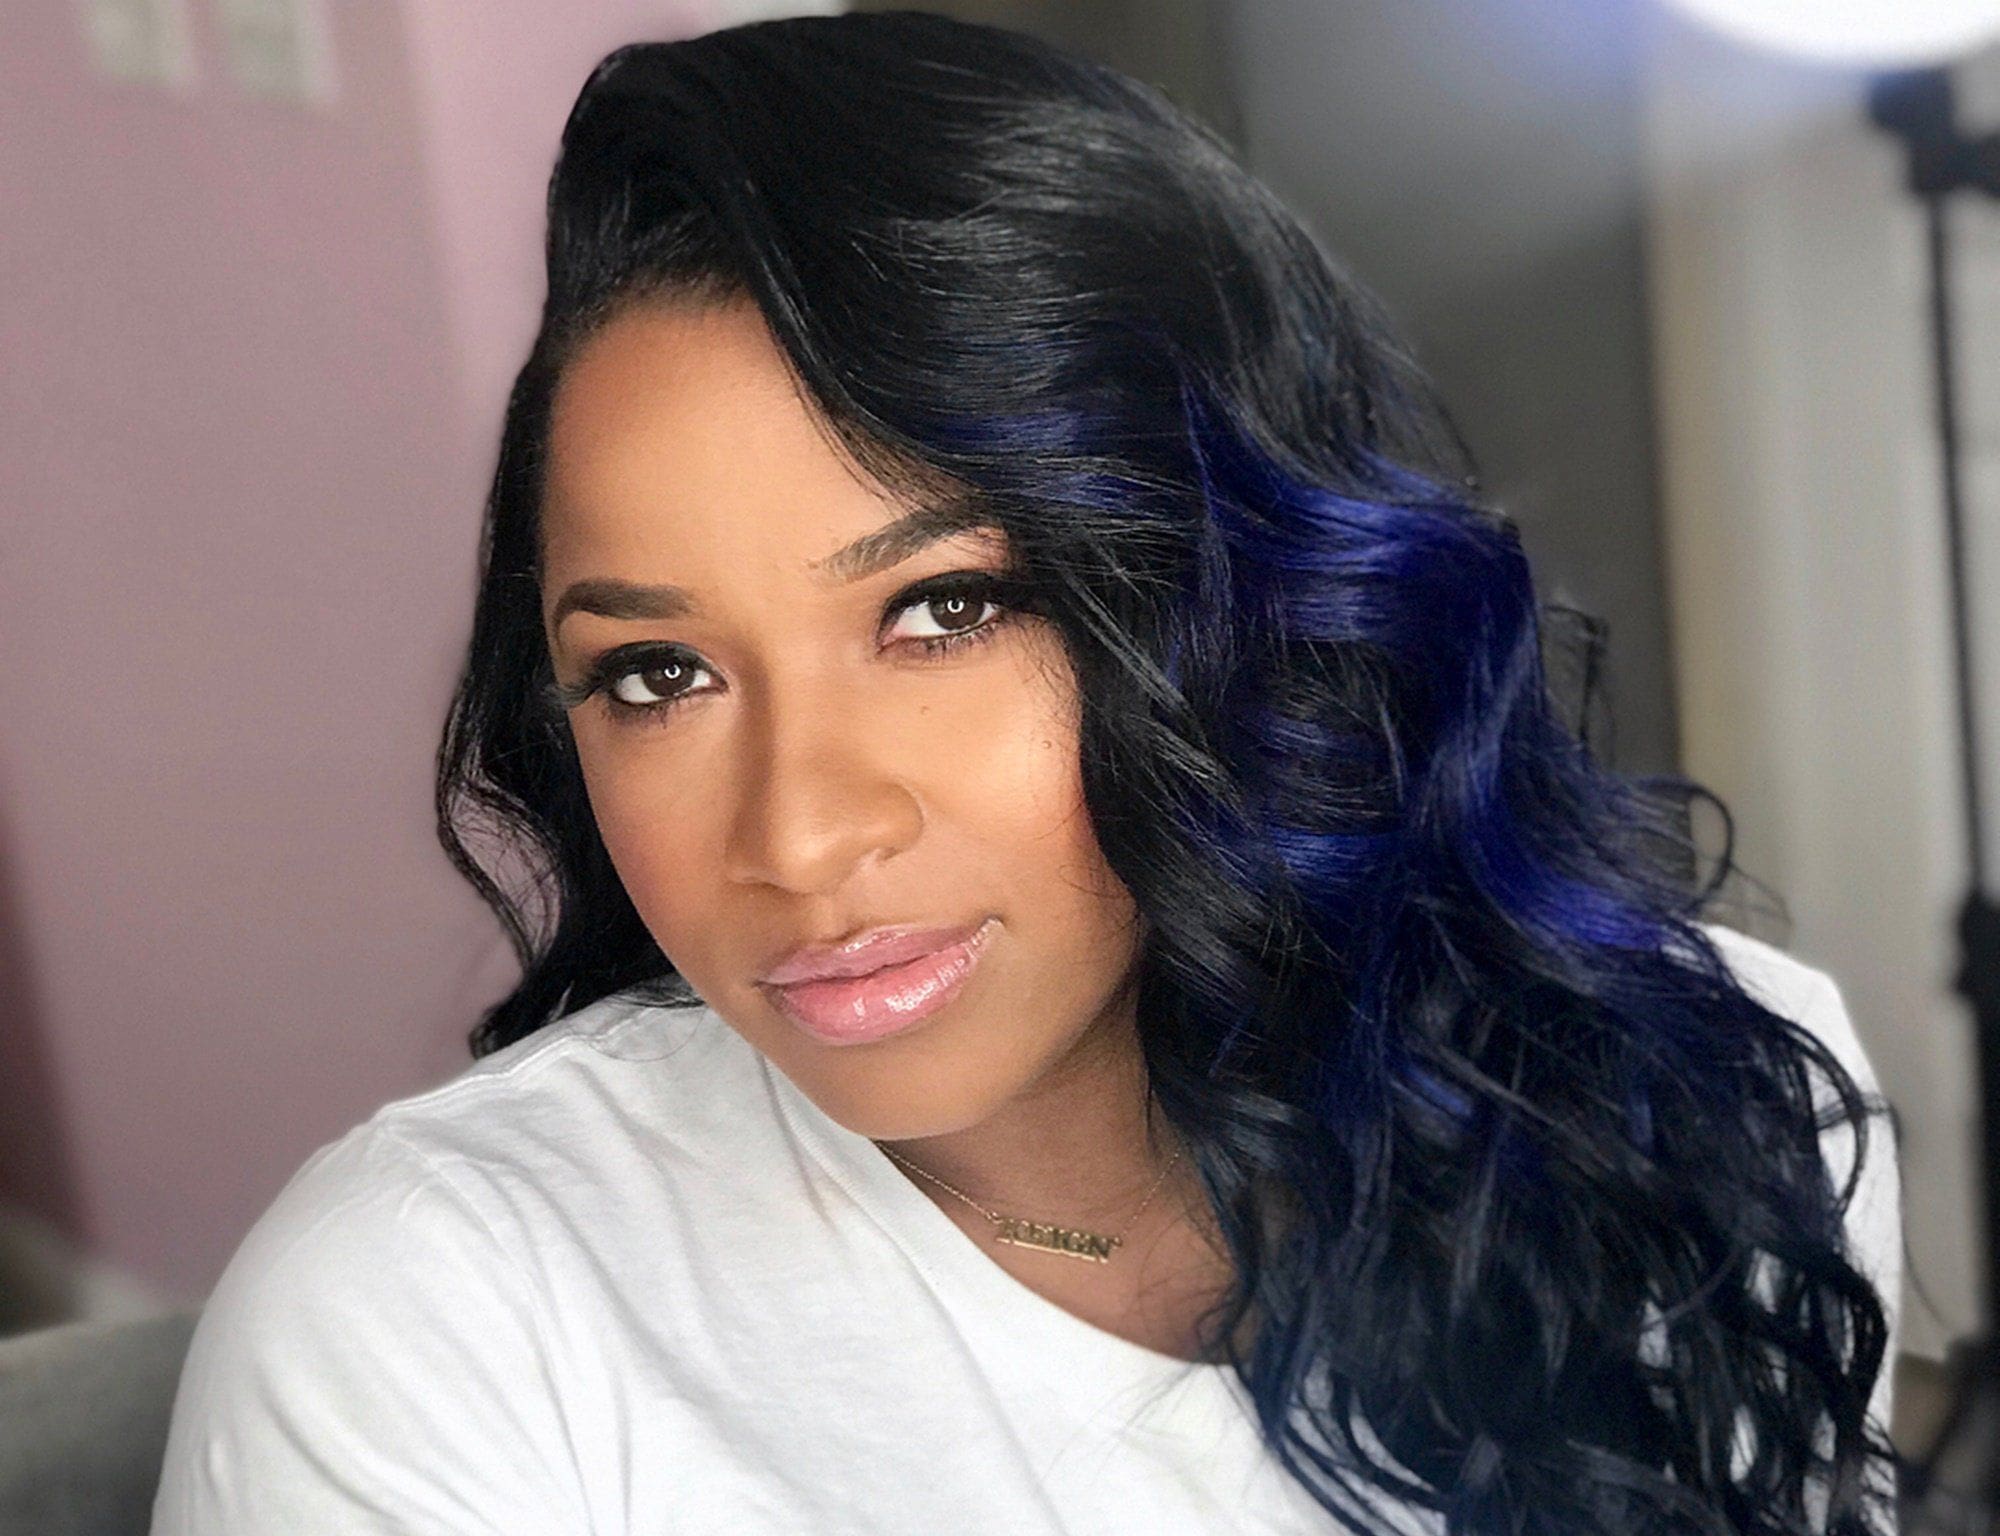 ”toya-wright-loves-the-woman-shes-becoming-fans-are-gushing-over-her-jaw-dropping-photo”